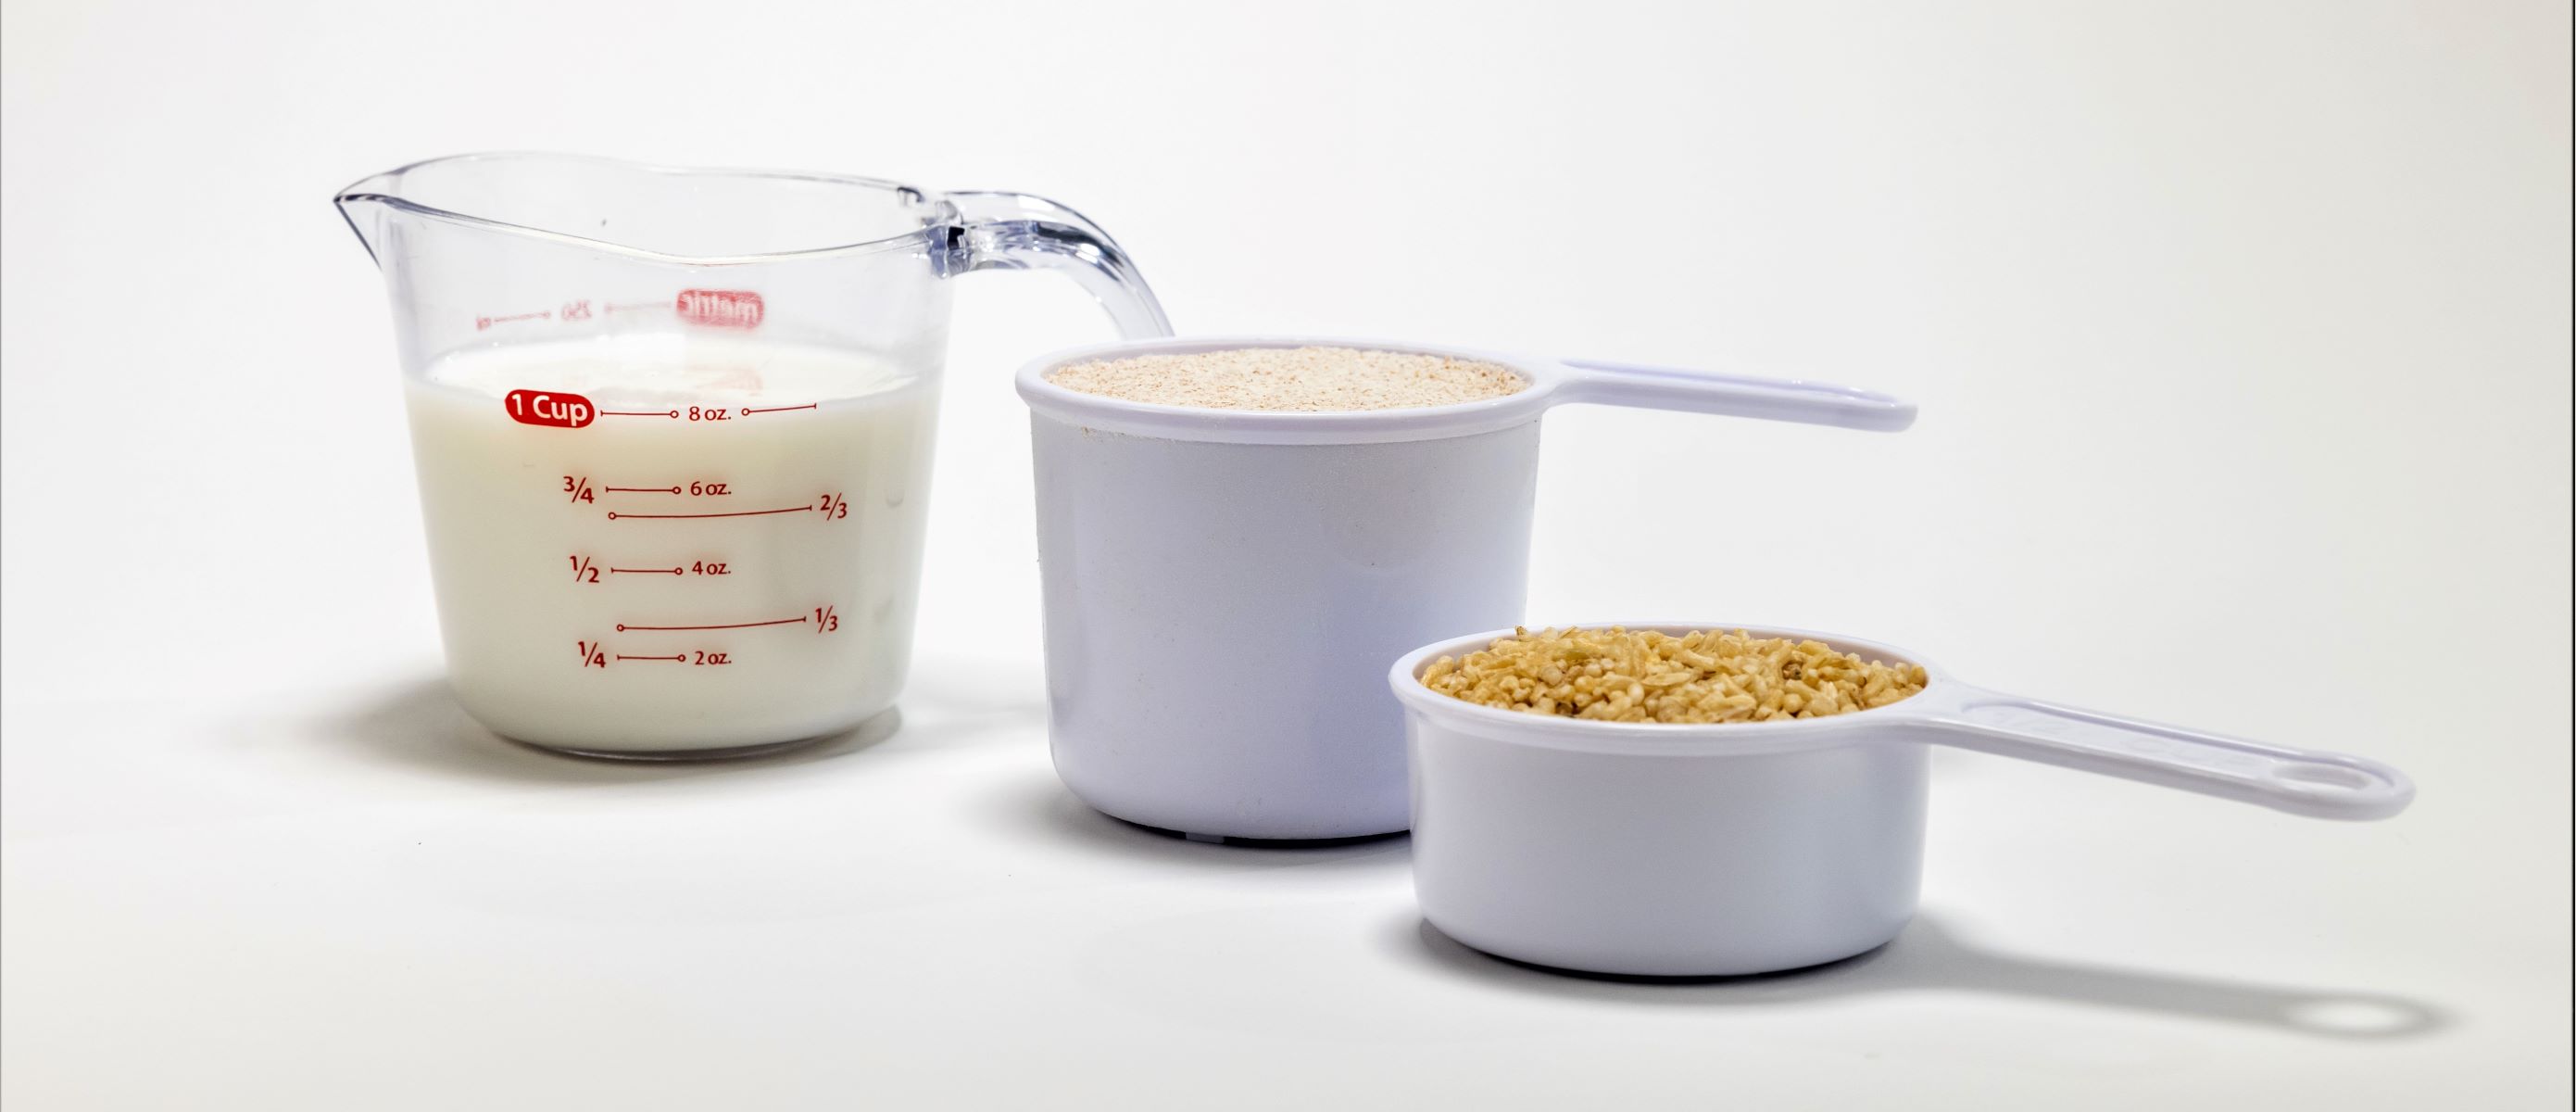 Master The Art Of Measuring 1/3 In Measuring Cups!